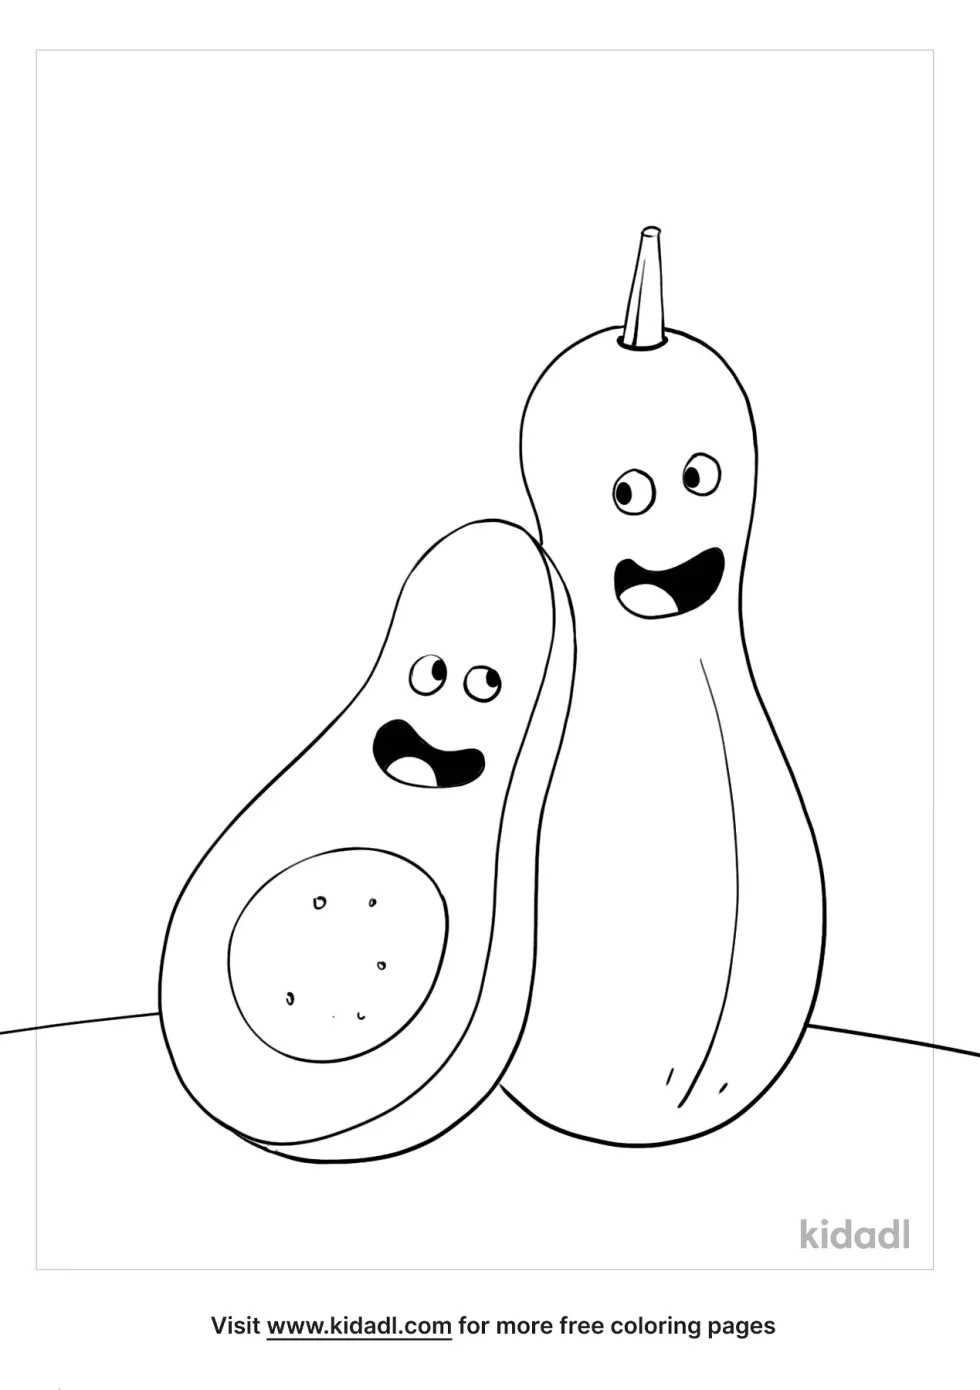 Butternut Squash Coloring Page